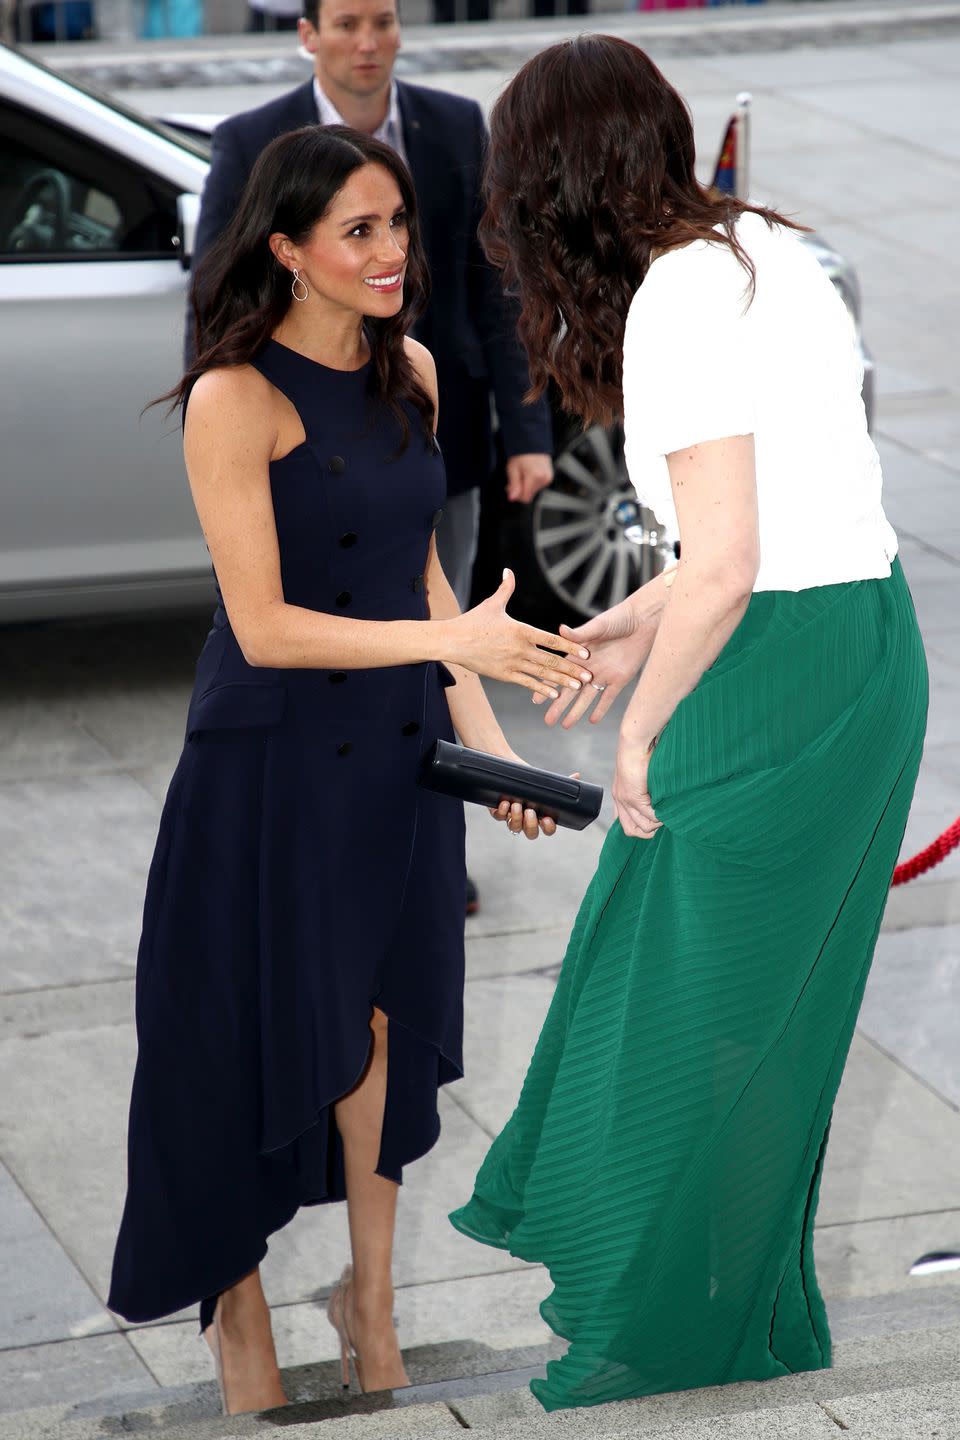 <p><strong>30 October </strong> The Duchess of Sussex shook the hand of New Zealand's Prime Minister, Jacinda Ardern. The royal wore an Antonio Berardi navy dress. </p>